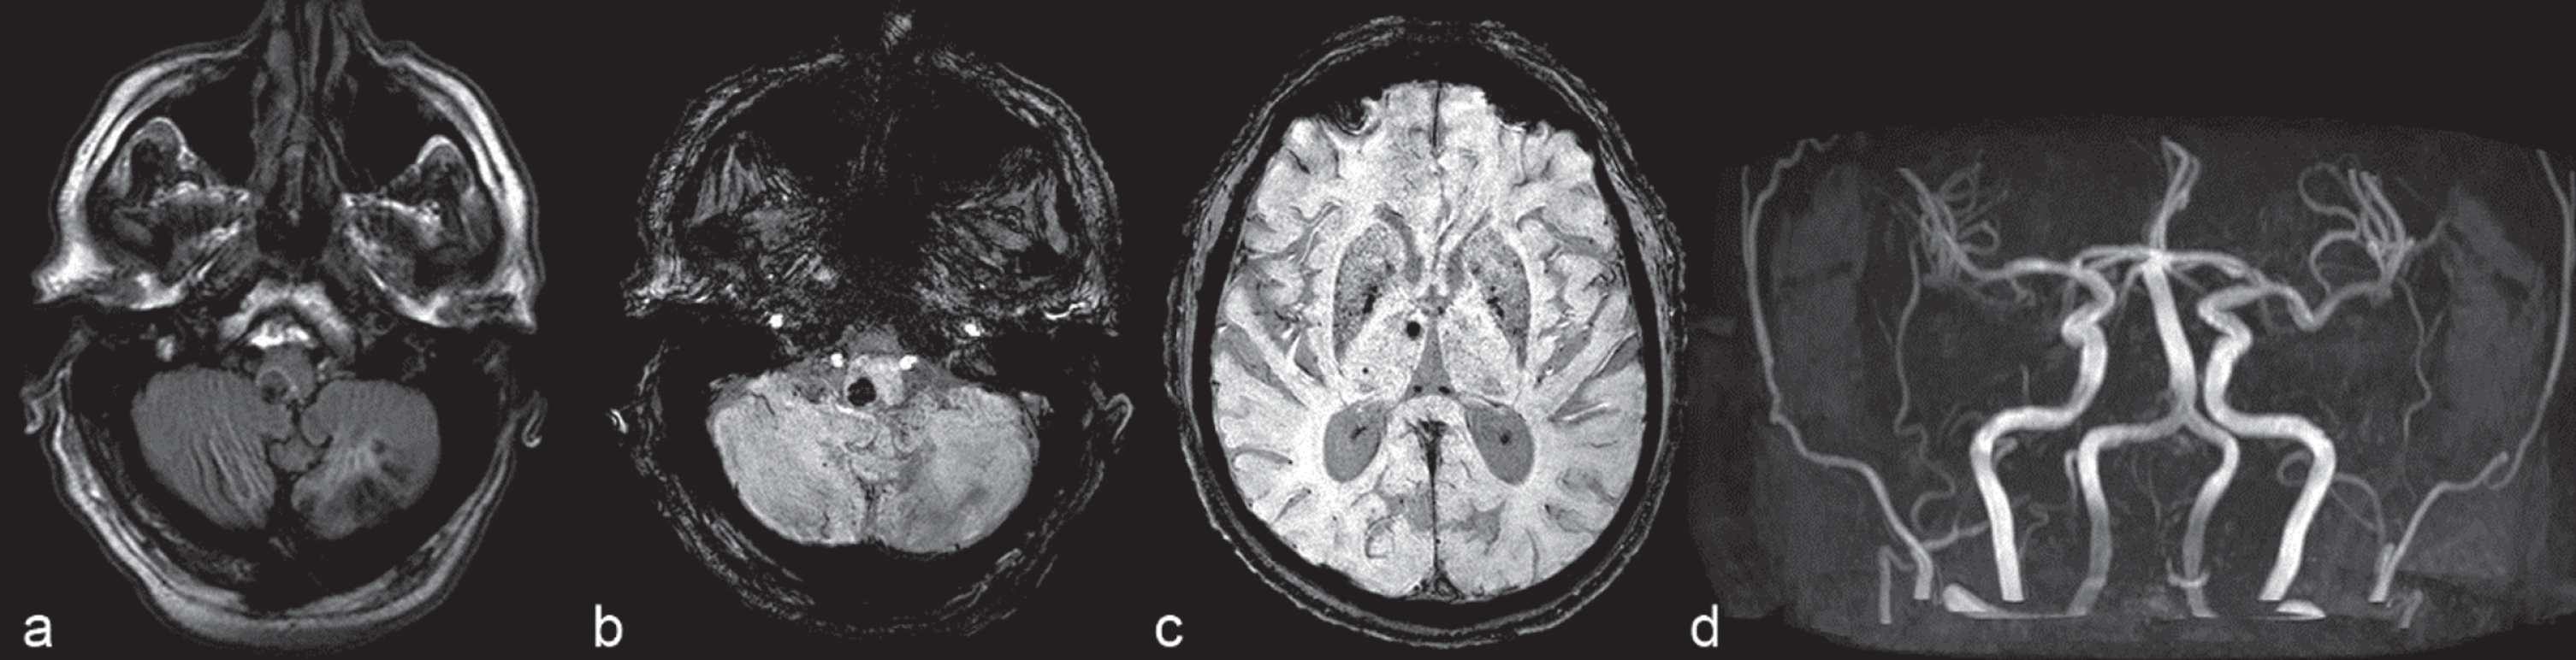 3.0 T brain MRI. 61-year-old male late-onset Pompe disease patient harbouring two pathogenic heterozygous GAA mutations, enzyme replacement therapy with glucosidase alfa since 9 years. a) FLAIR sequences. Subacute paramedian pontine hemorrhage, chronic ischemic stroke lesion affecting the left cerebellar hemisphere. b) Susceptibility-weighted images (SWI). Subacute paramedian pontine hemorrhage, mild ectasia of the basilar artery and dilative angiopathy of vertebral arteries, chronic ischemic stroke lesion affecting the left cerebellar hemisphere. c) Susceptibility-weighted images (SWI). Multiple microbleeds presenting predominantly as vertebrobasilar circulation disorder. d) MR angiography shows mild ectasia of the basilar artery and dilative angiopathy of vertebral arteries.